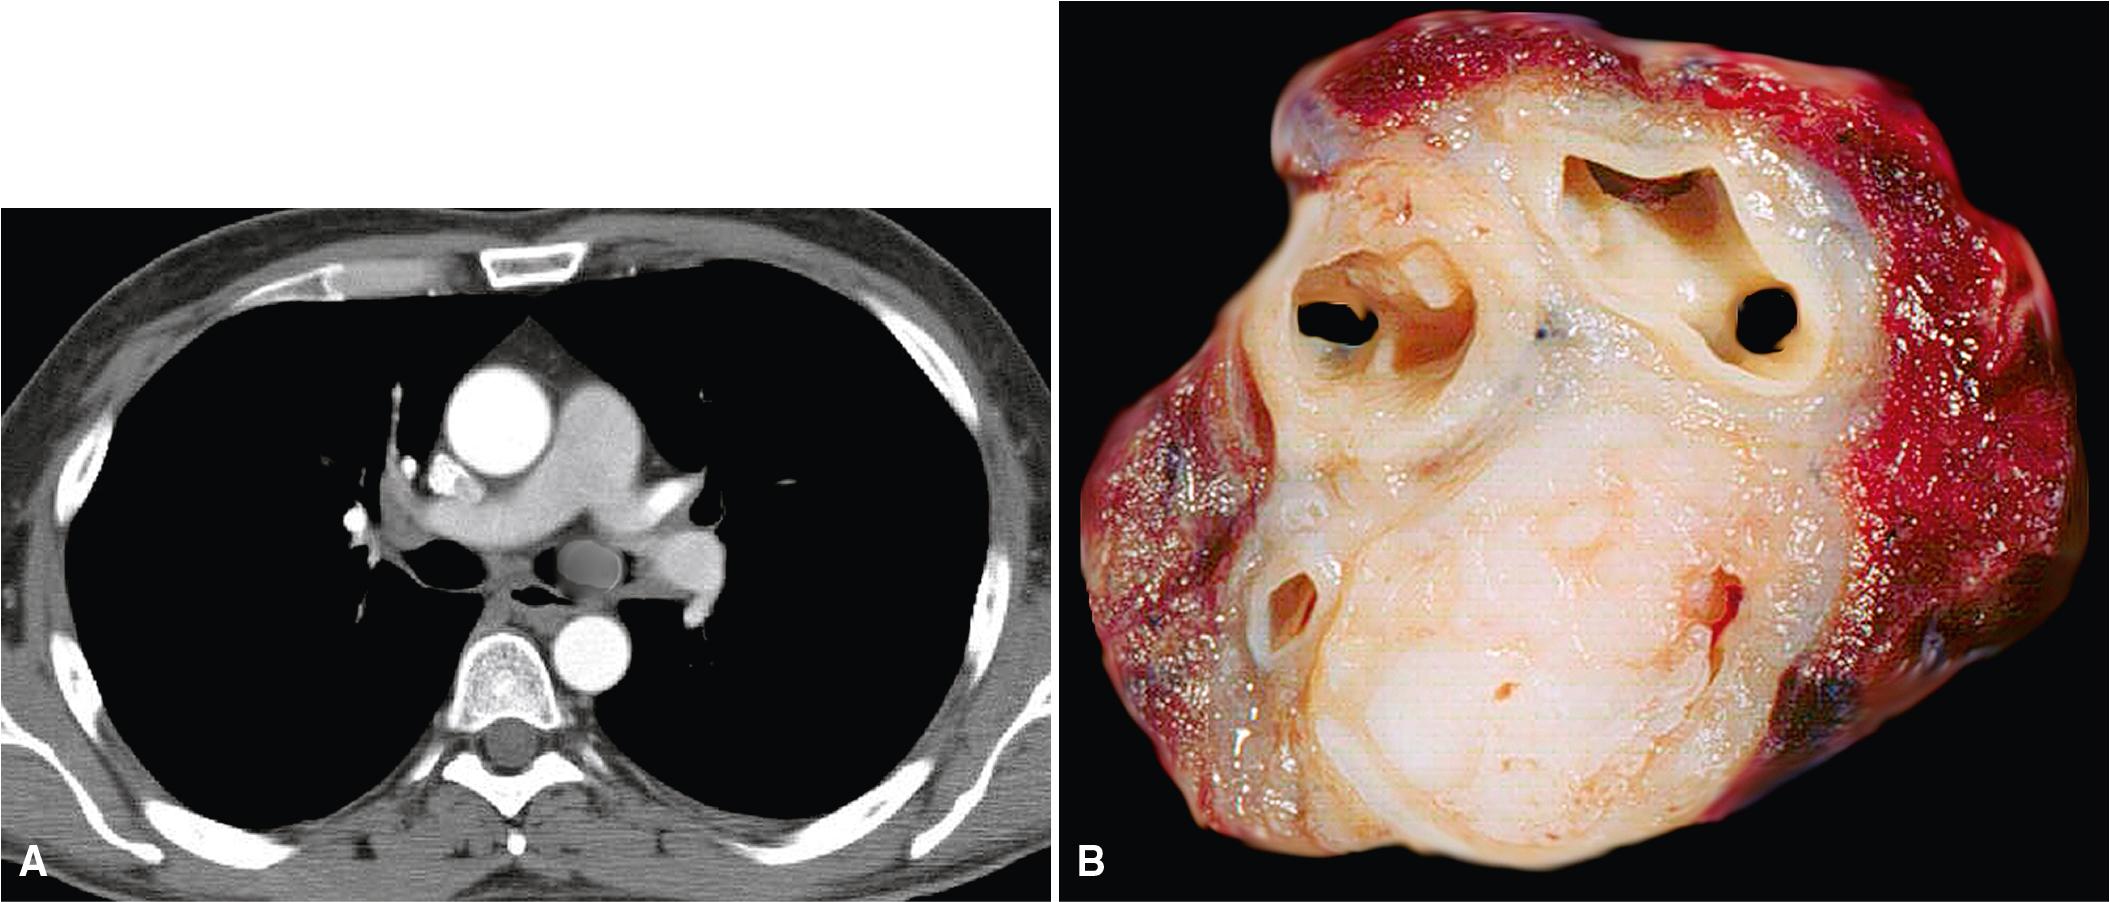 Figure 15.3, (A) Computed-tomographic image showing an endobronchial mass in the left mainstem bronchus. (B) Resection of the lung demonstrated an endoluminal neoplasm that proved to be a sarcomatoid carcinoma.